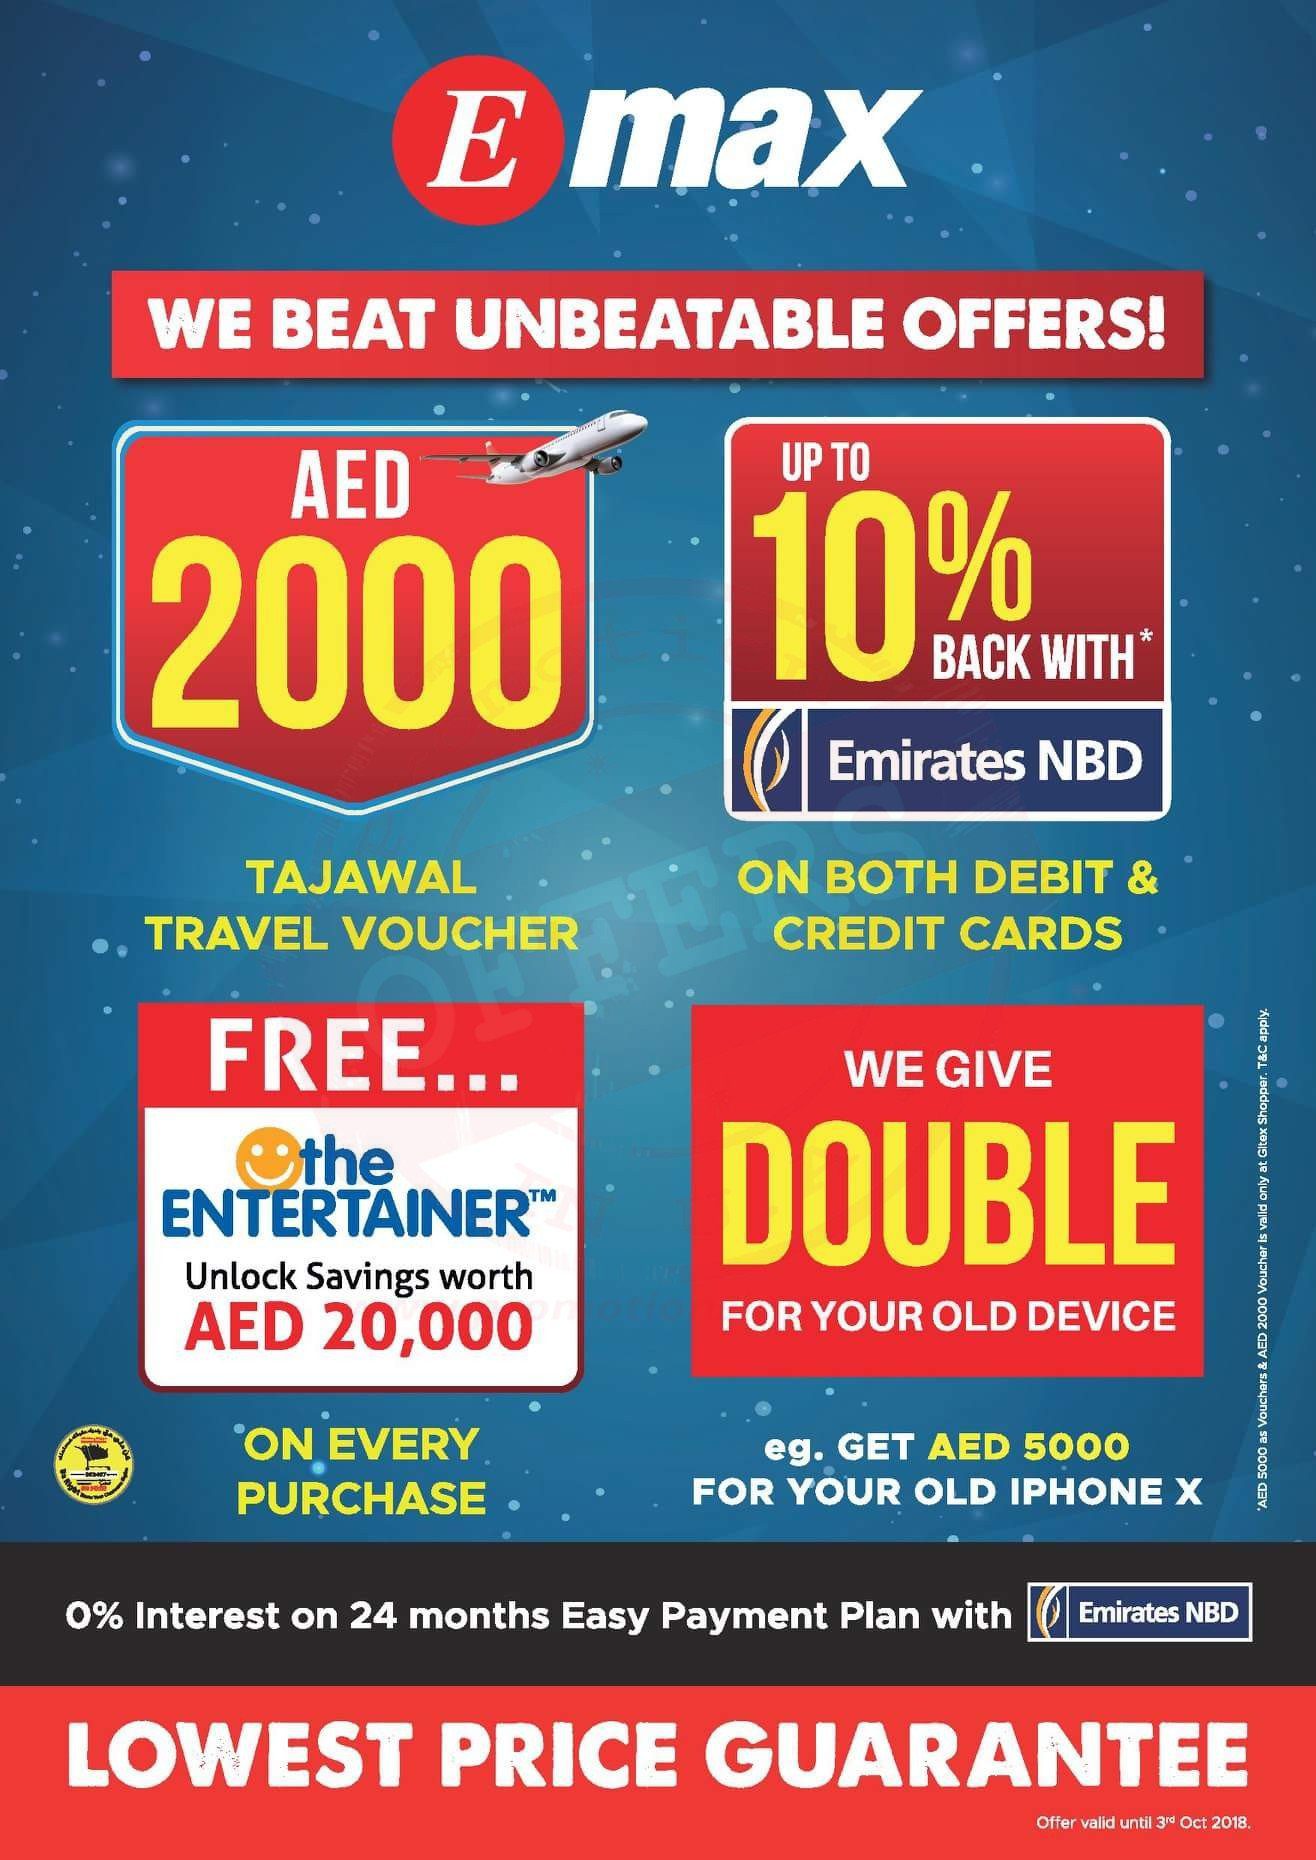 The Emax 7 wonders are here to amaze you this Gitex! Visit the Emax stand @ Gitex Shopper or any of Emax stores to grab these unbeatable market deals!